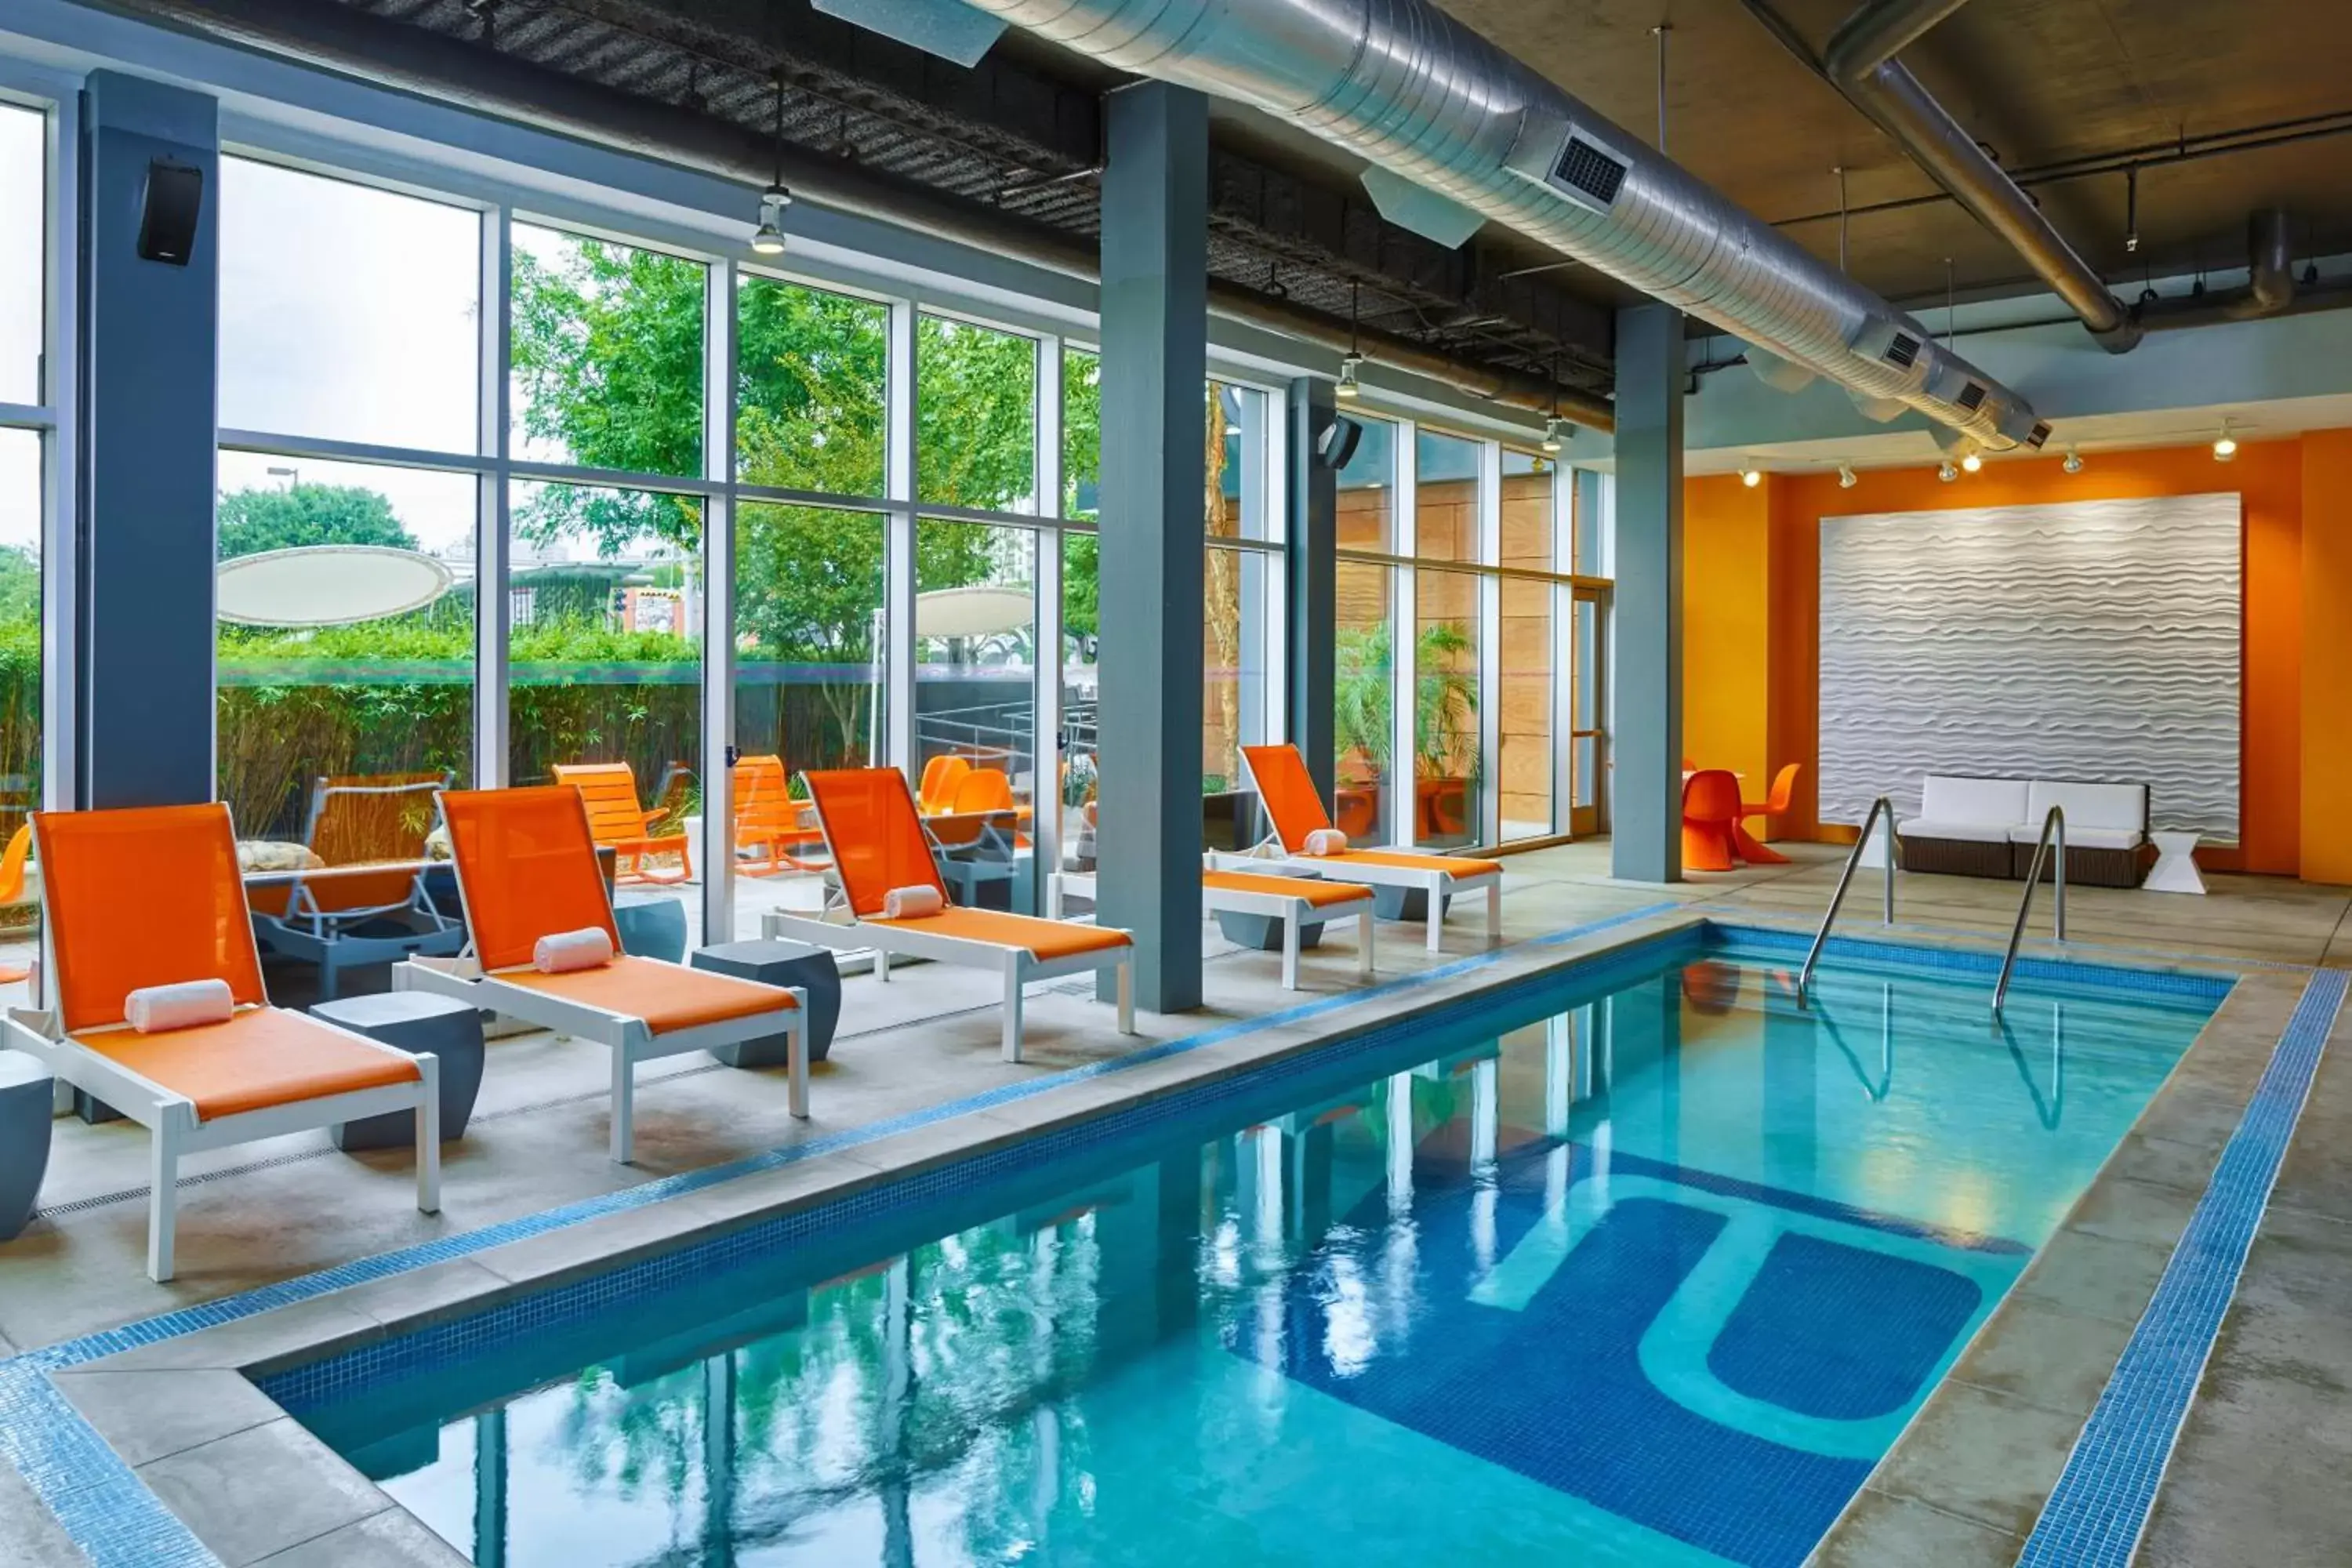 Swimming Pool in Aloft Houston by the Galleria